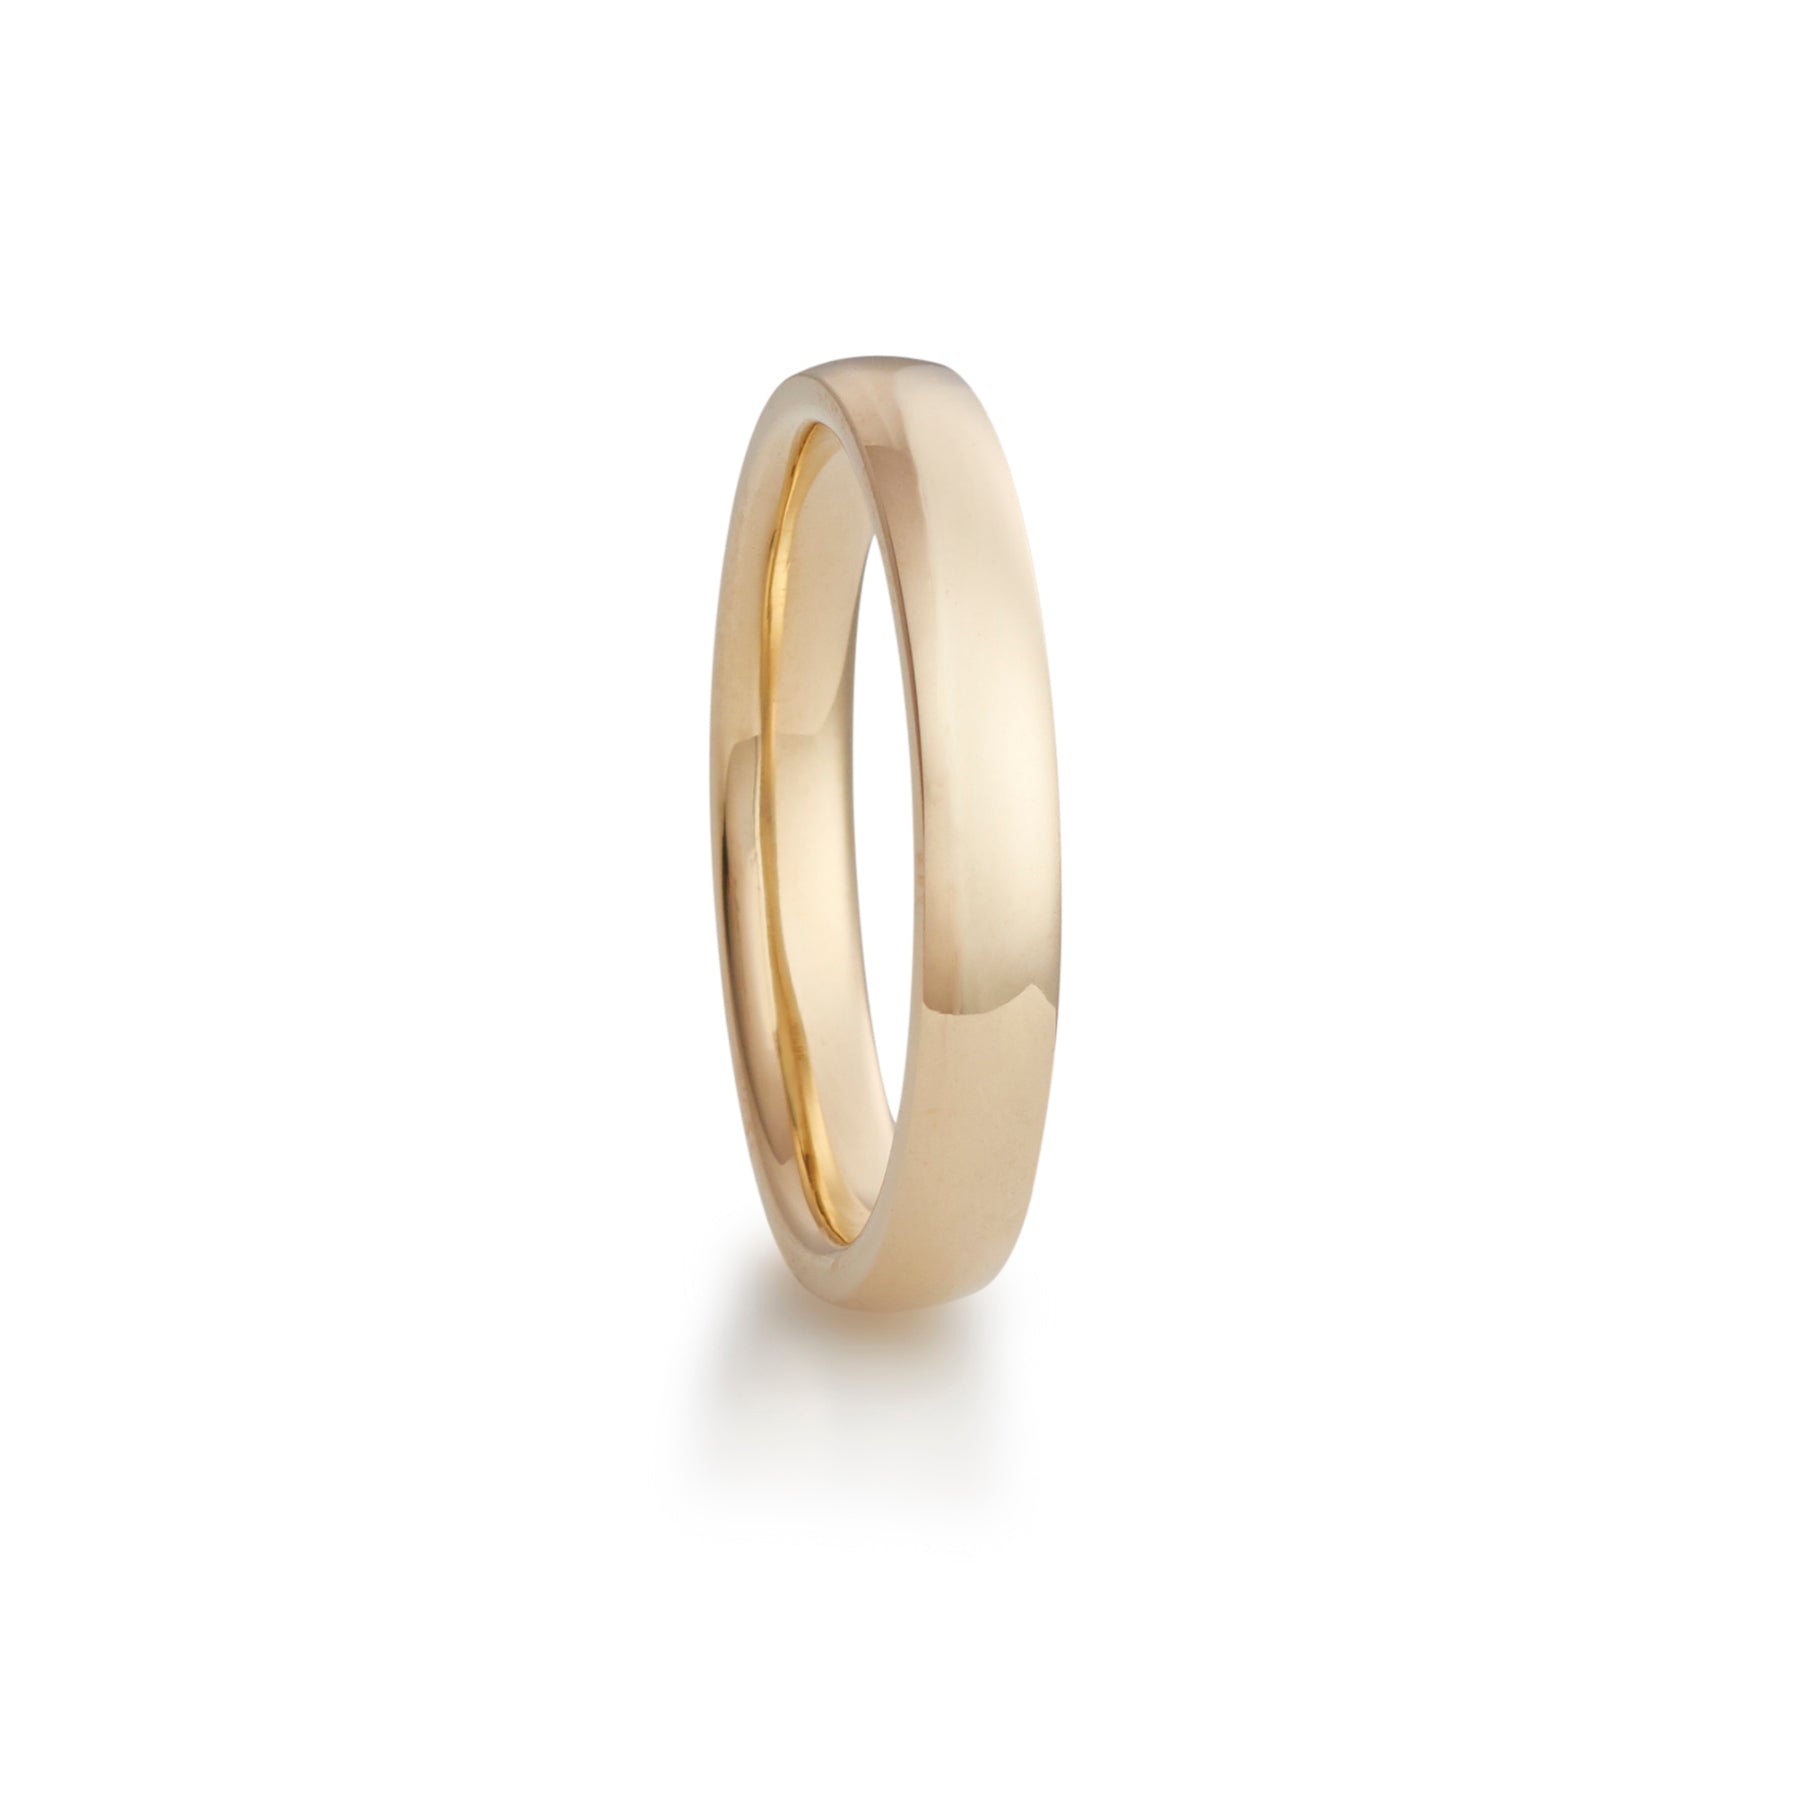 Faithful ring in yellow gold, lady